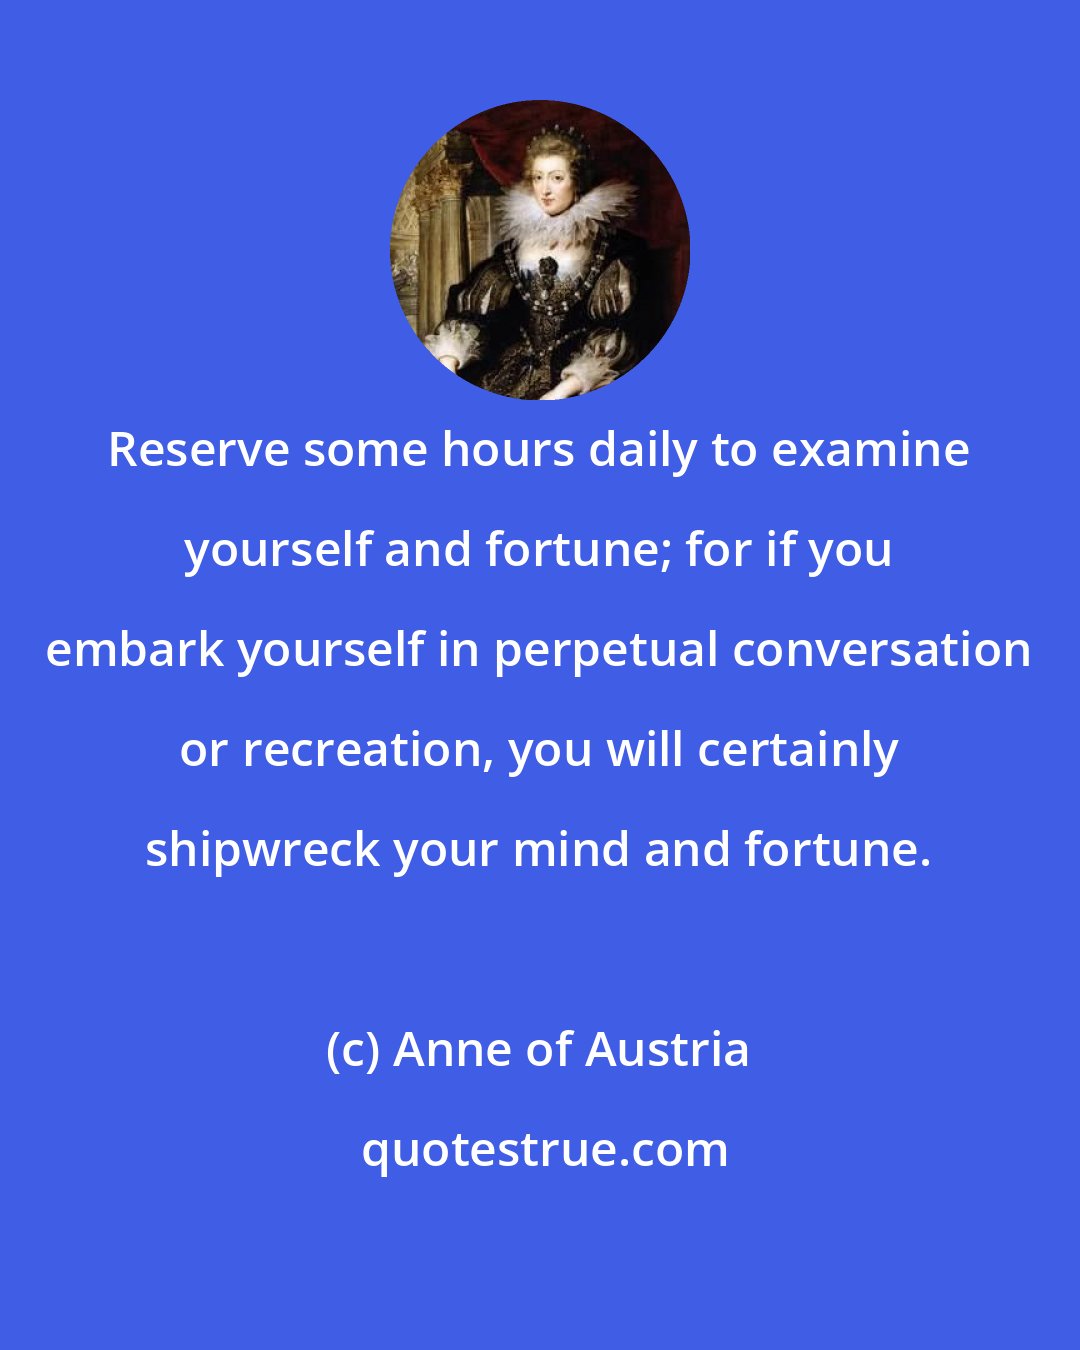 Anne of Austria: Reserve some hours daily to examine yourself and fortune; for if you embark yourself in perpetual conversation or recreation, you will certainly shipwreck your mind and fortune.